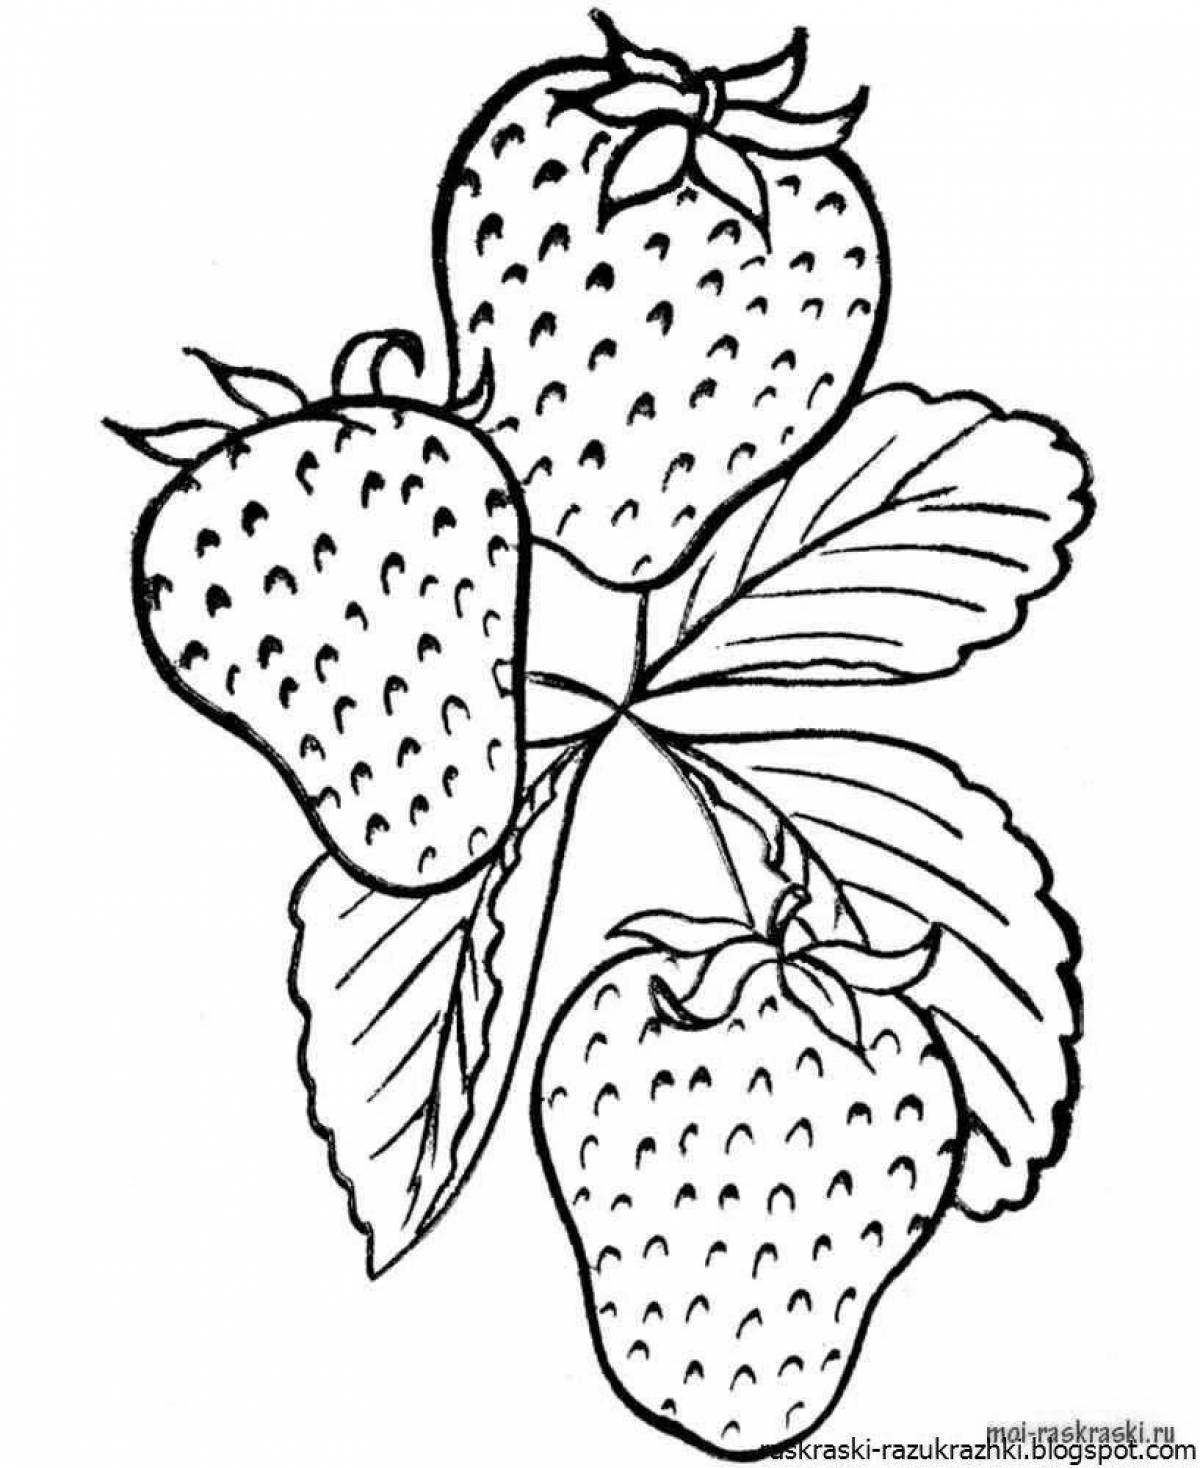 Colourful strawberry coloring book for kids